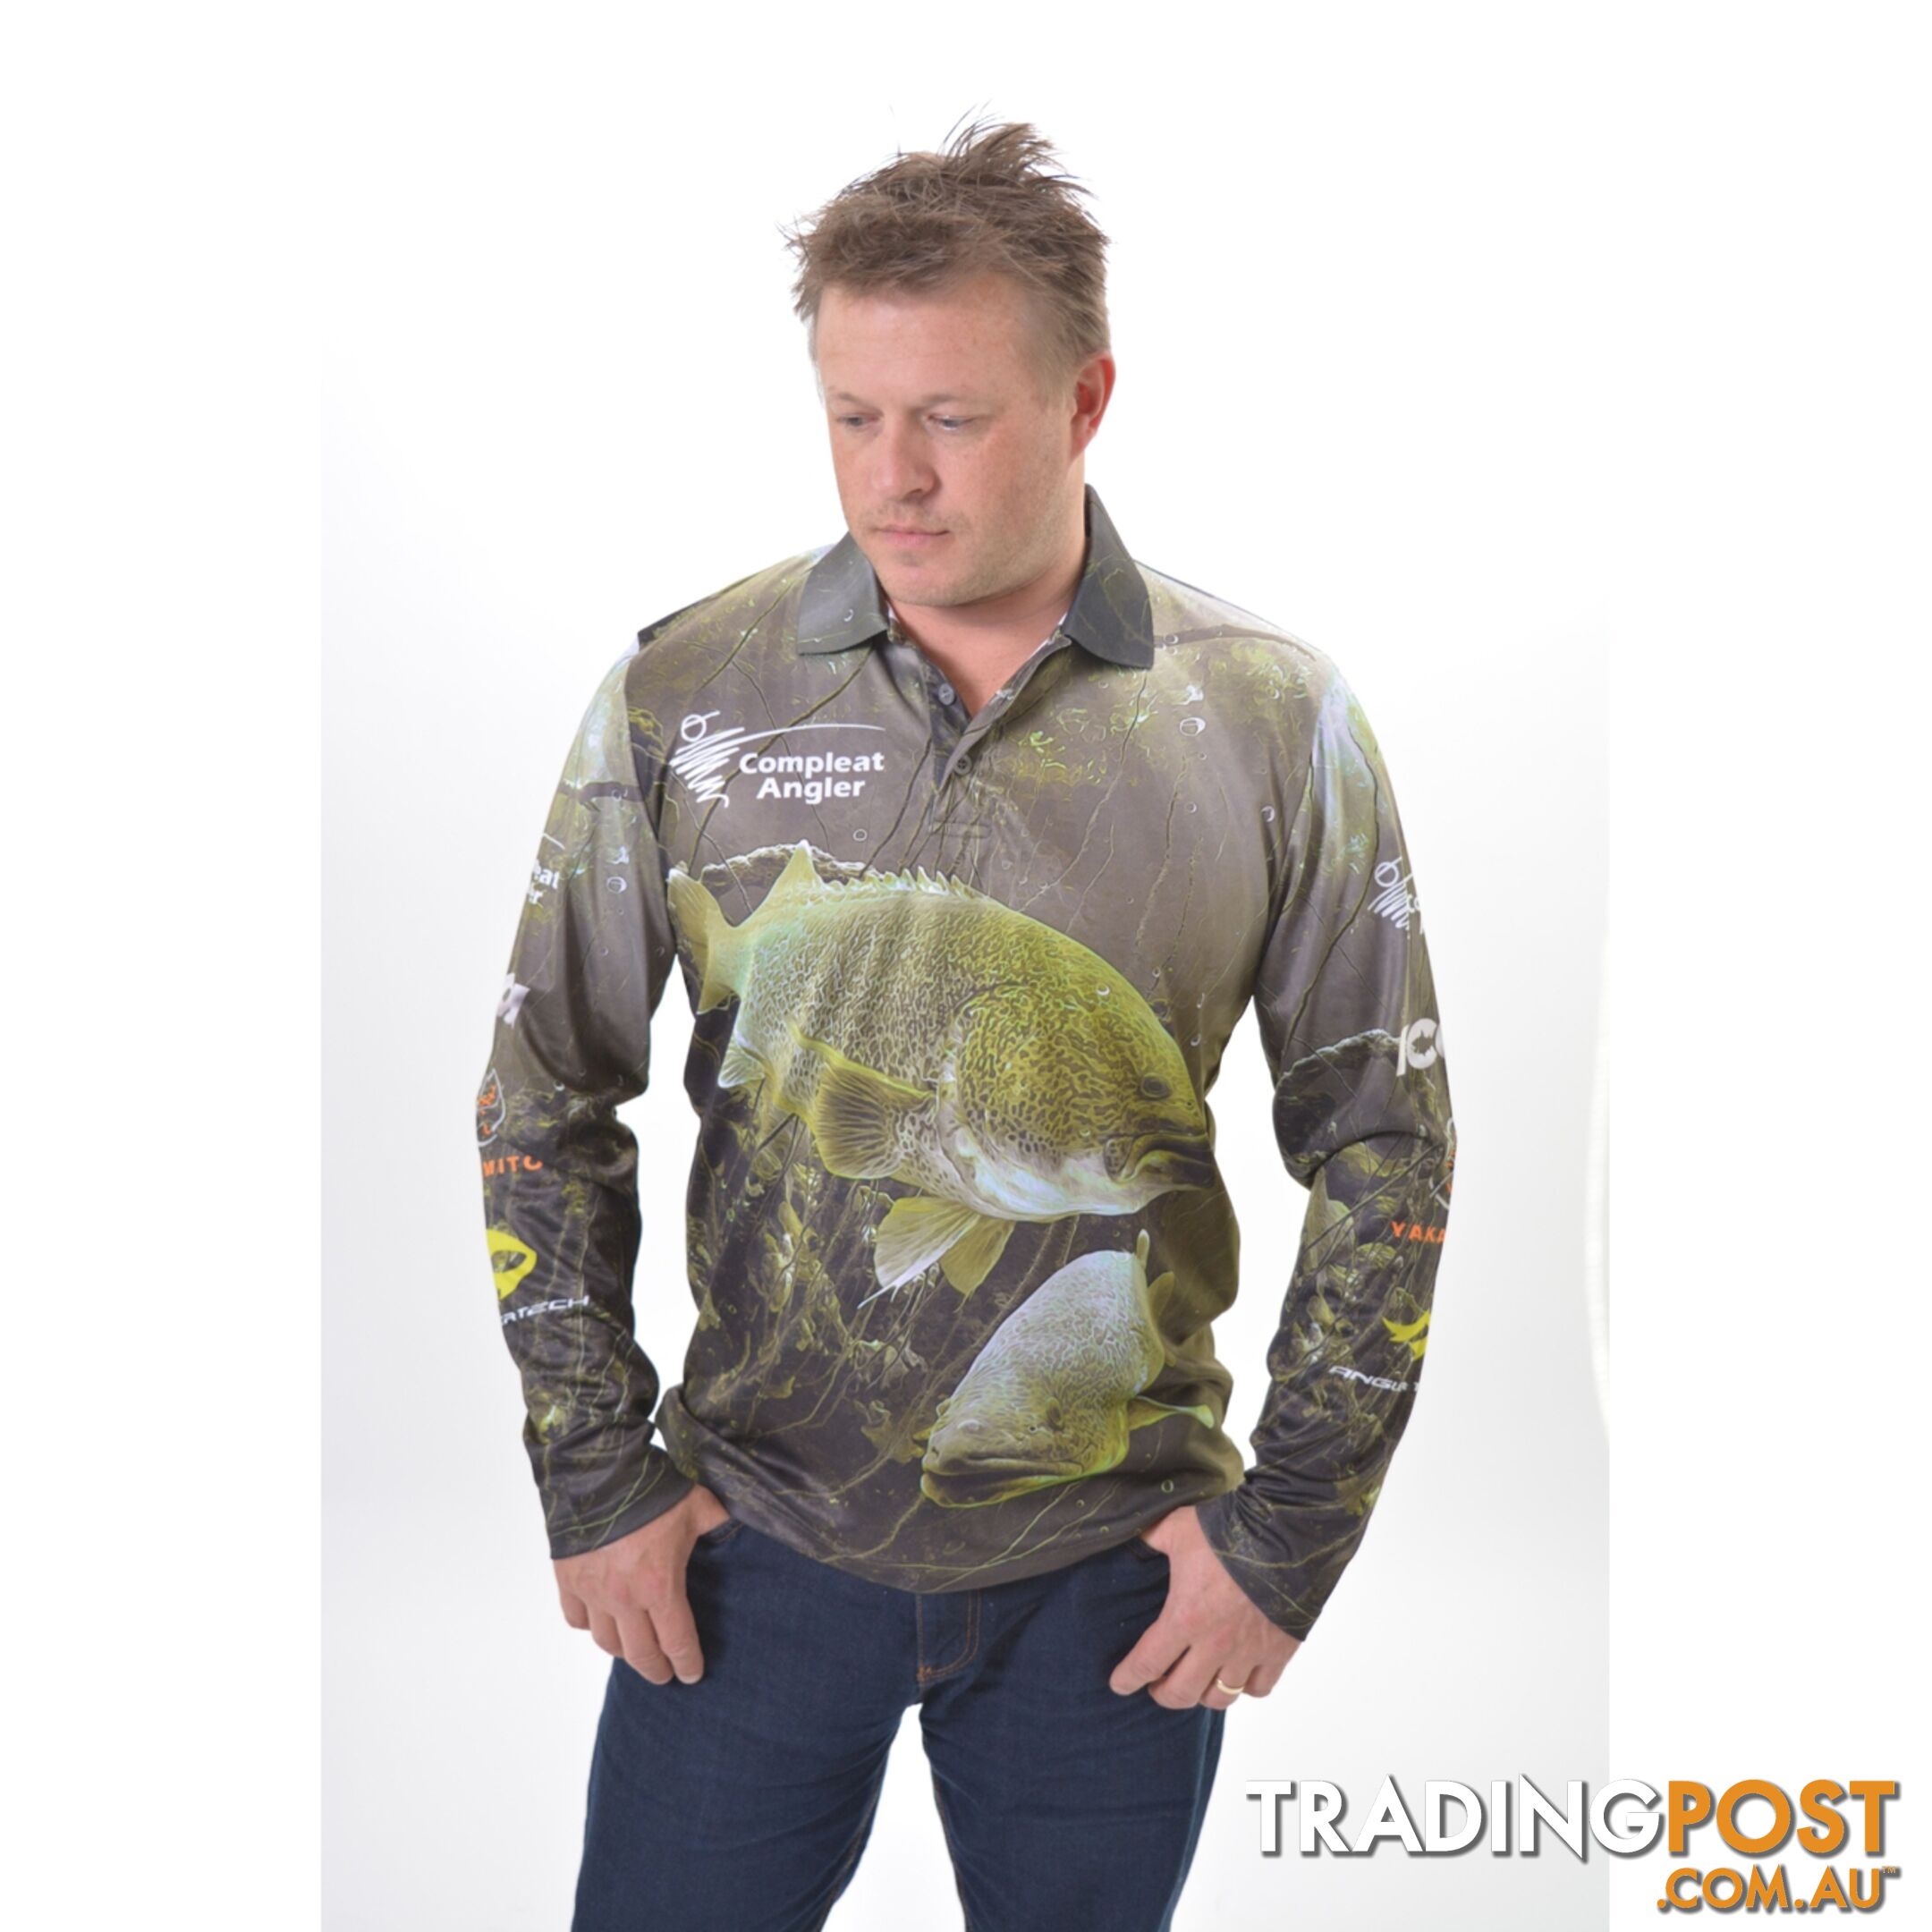 Compleat Angler Cod Tourno Shirt - X-Large - 1123996-XL